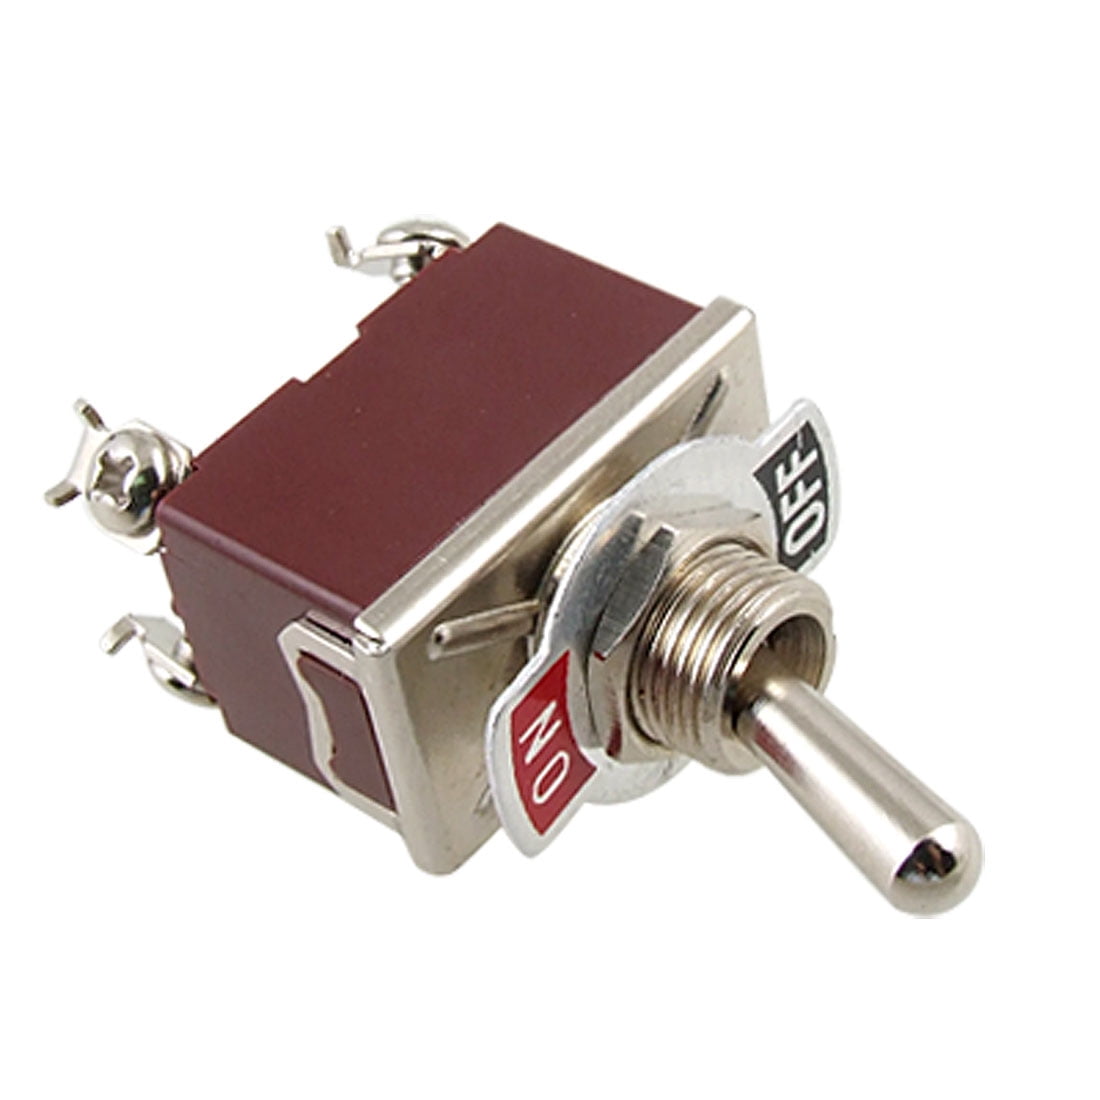 LEVER TOGGLE SWITCH UNIVERSAL 250V ON OFF 2 POSITION 4 TERMINAL COFFEE MACHINE 